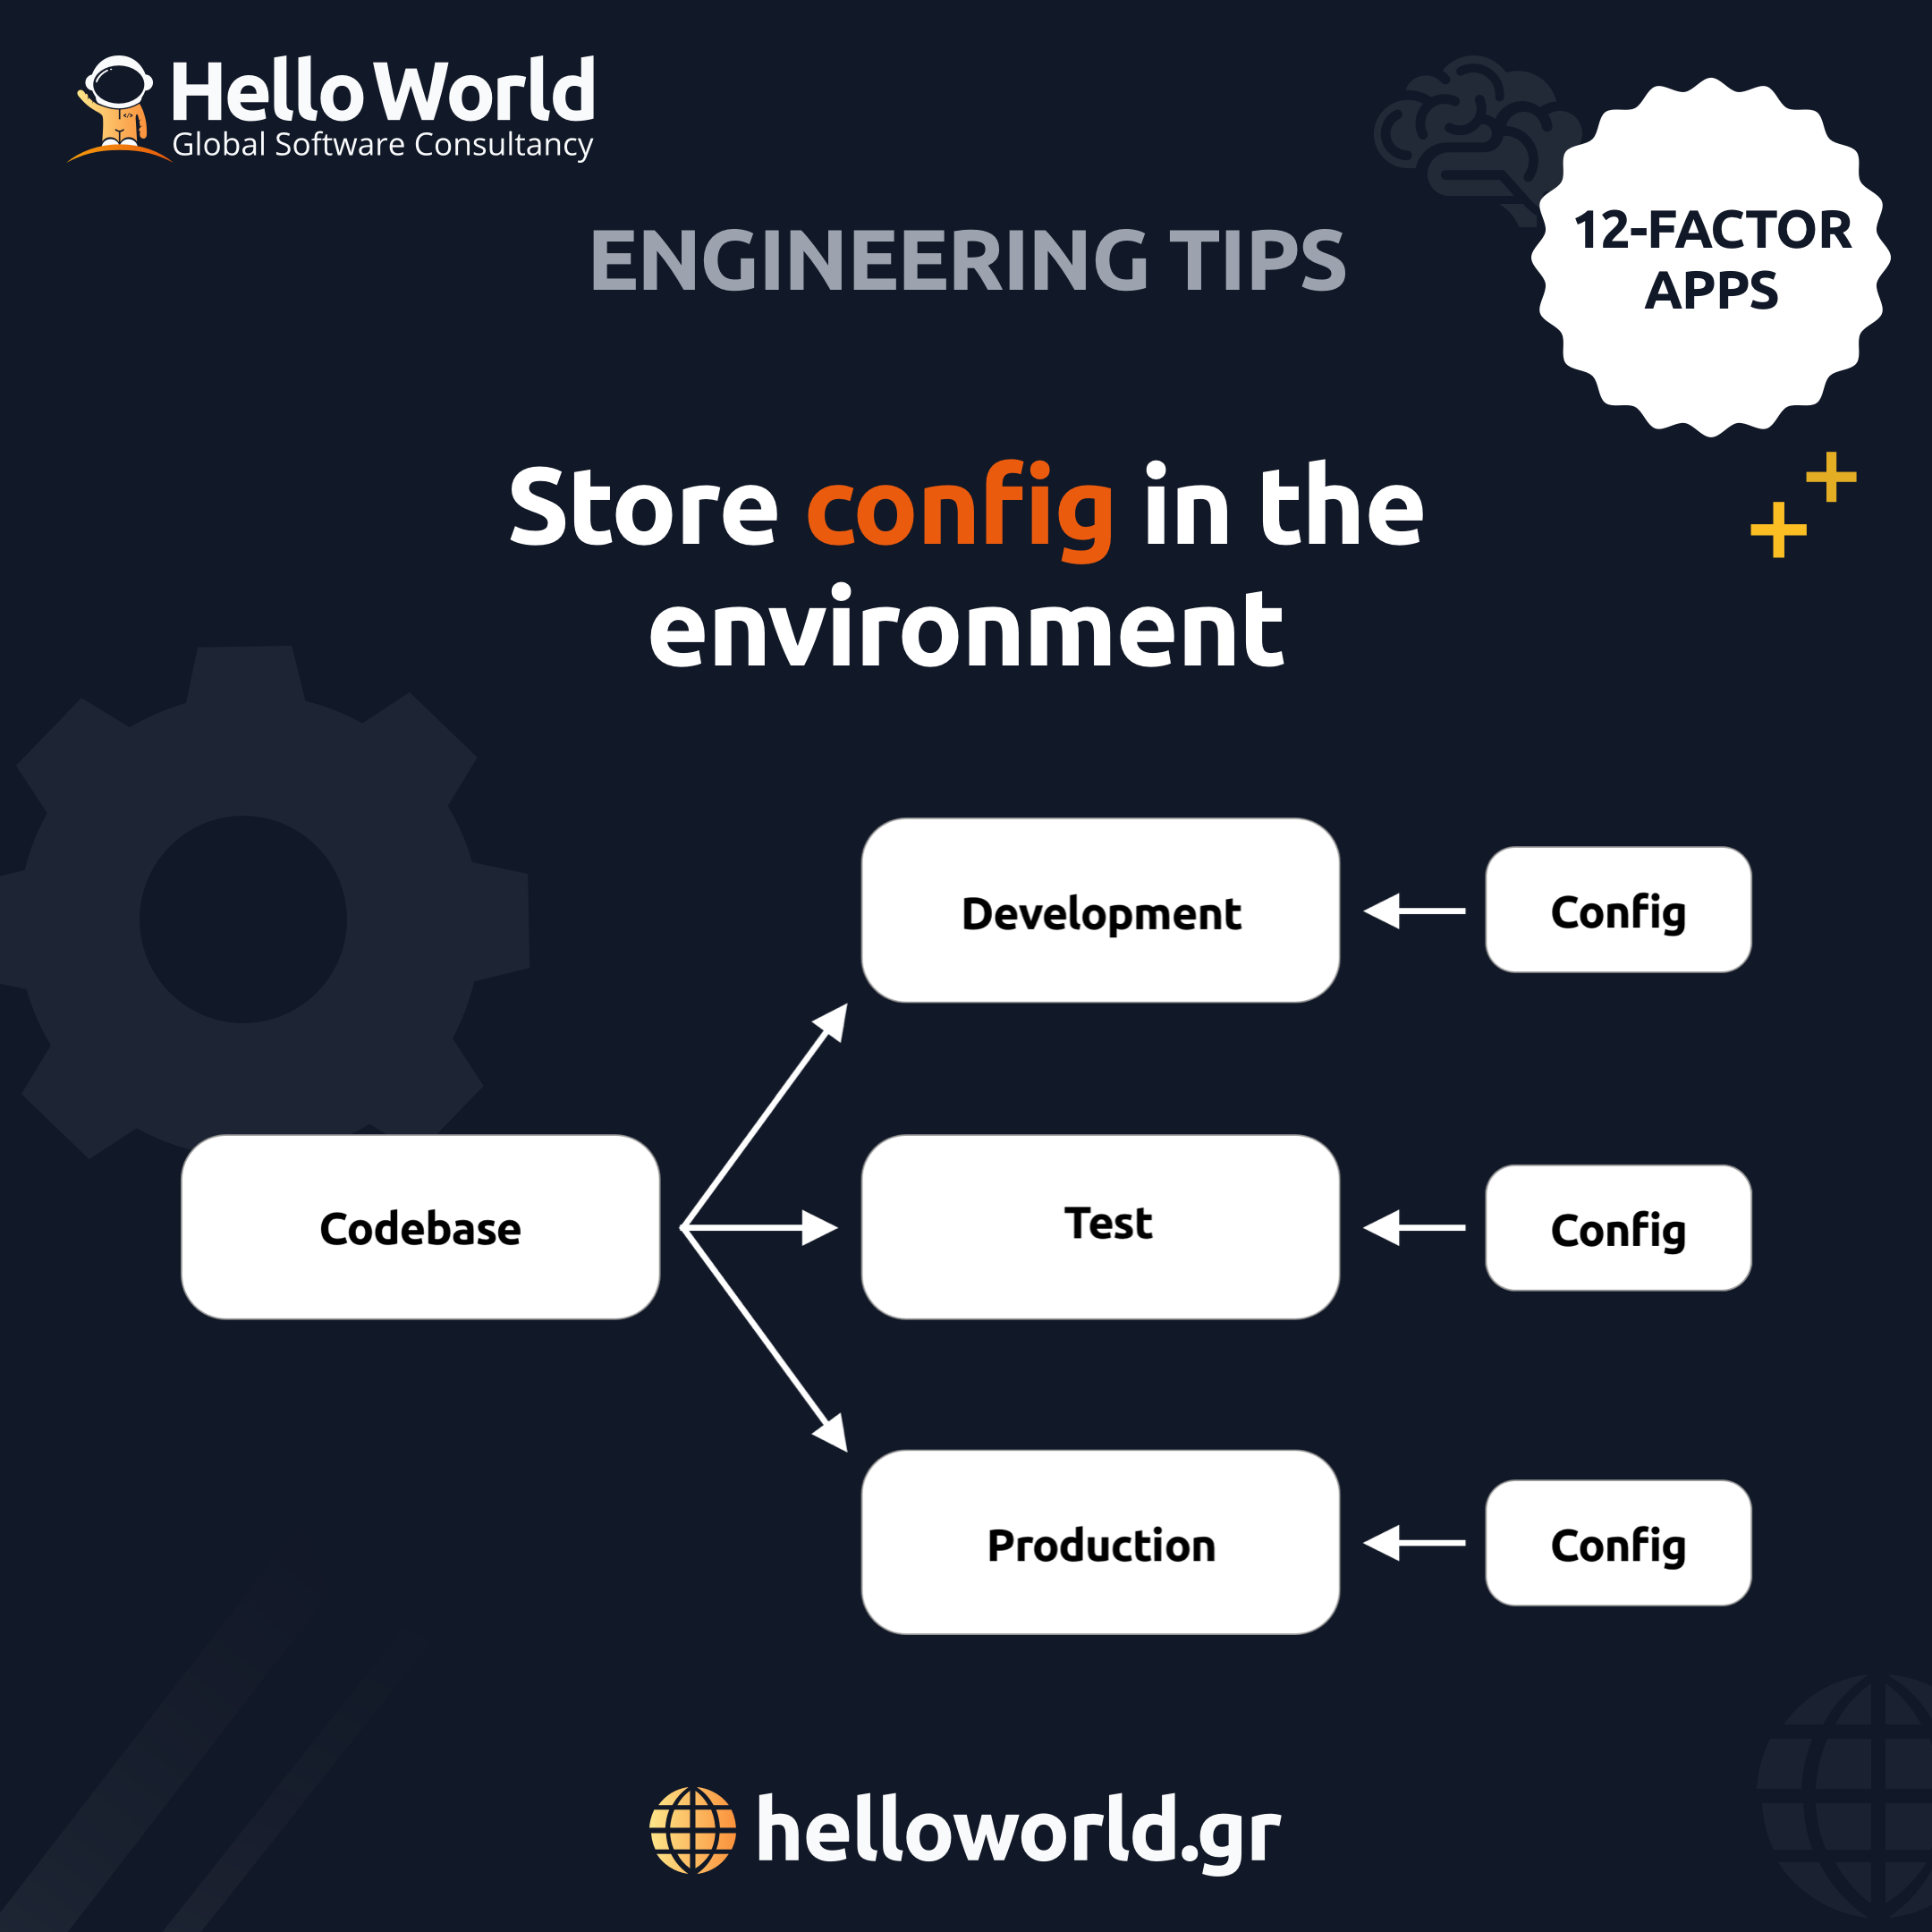 Config: Store config in the environment